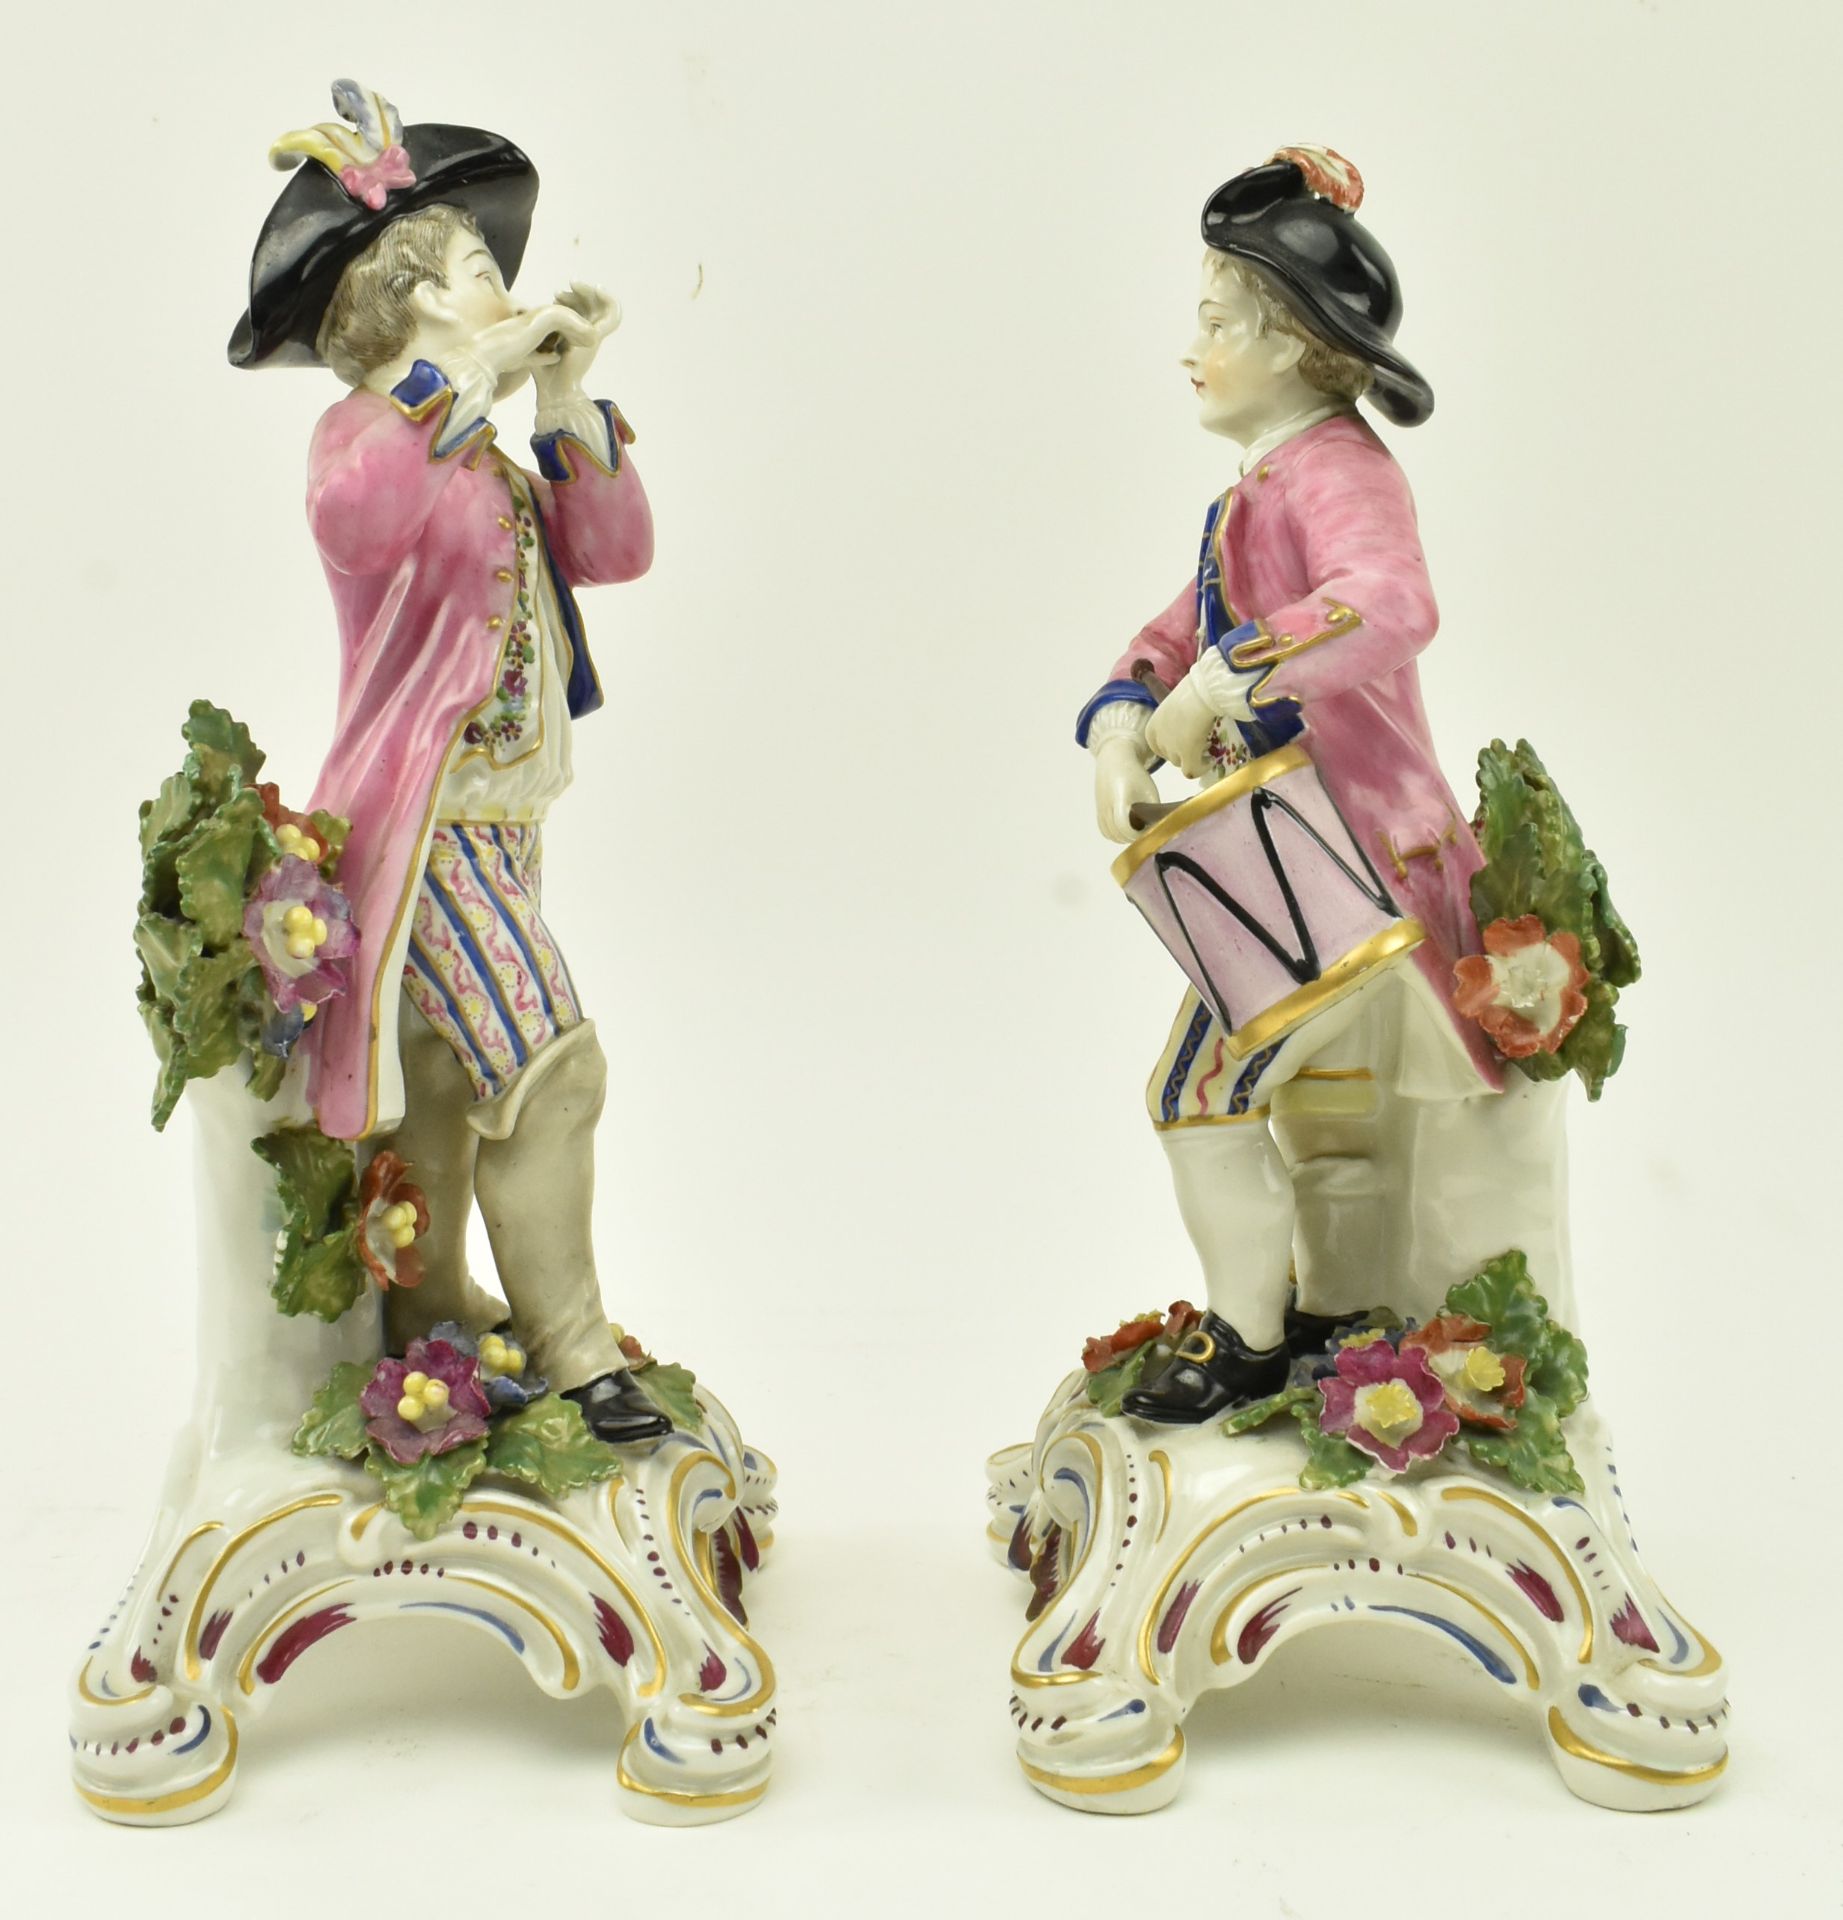 PAIR OF WILLIAM COCKWORTHY PLYMOUTH FIGURES OF MUSICIANS - Image 2 of 5